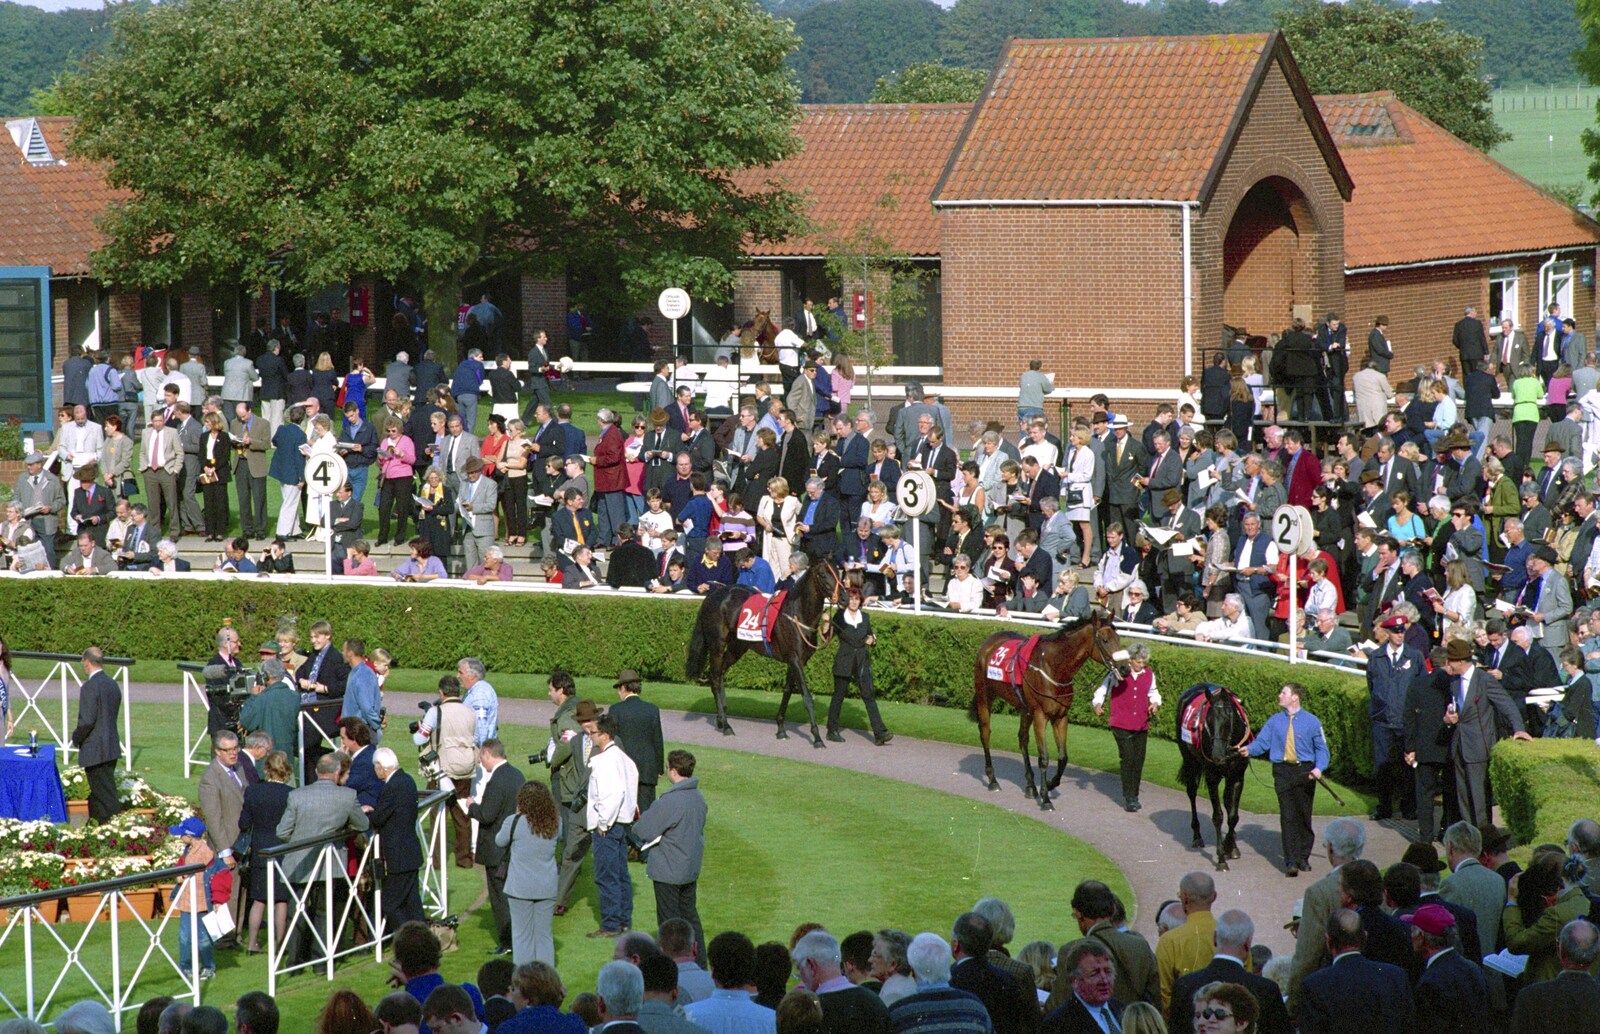 More parade ring action from 3G Lab Goes to the Races, Newmarket, Suffolk - 15th July 2001